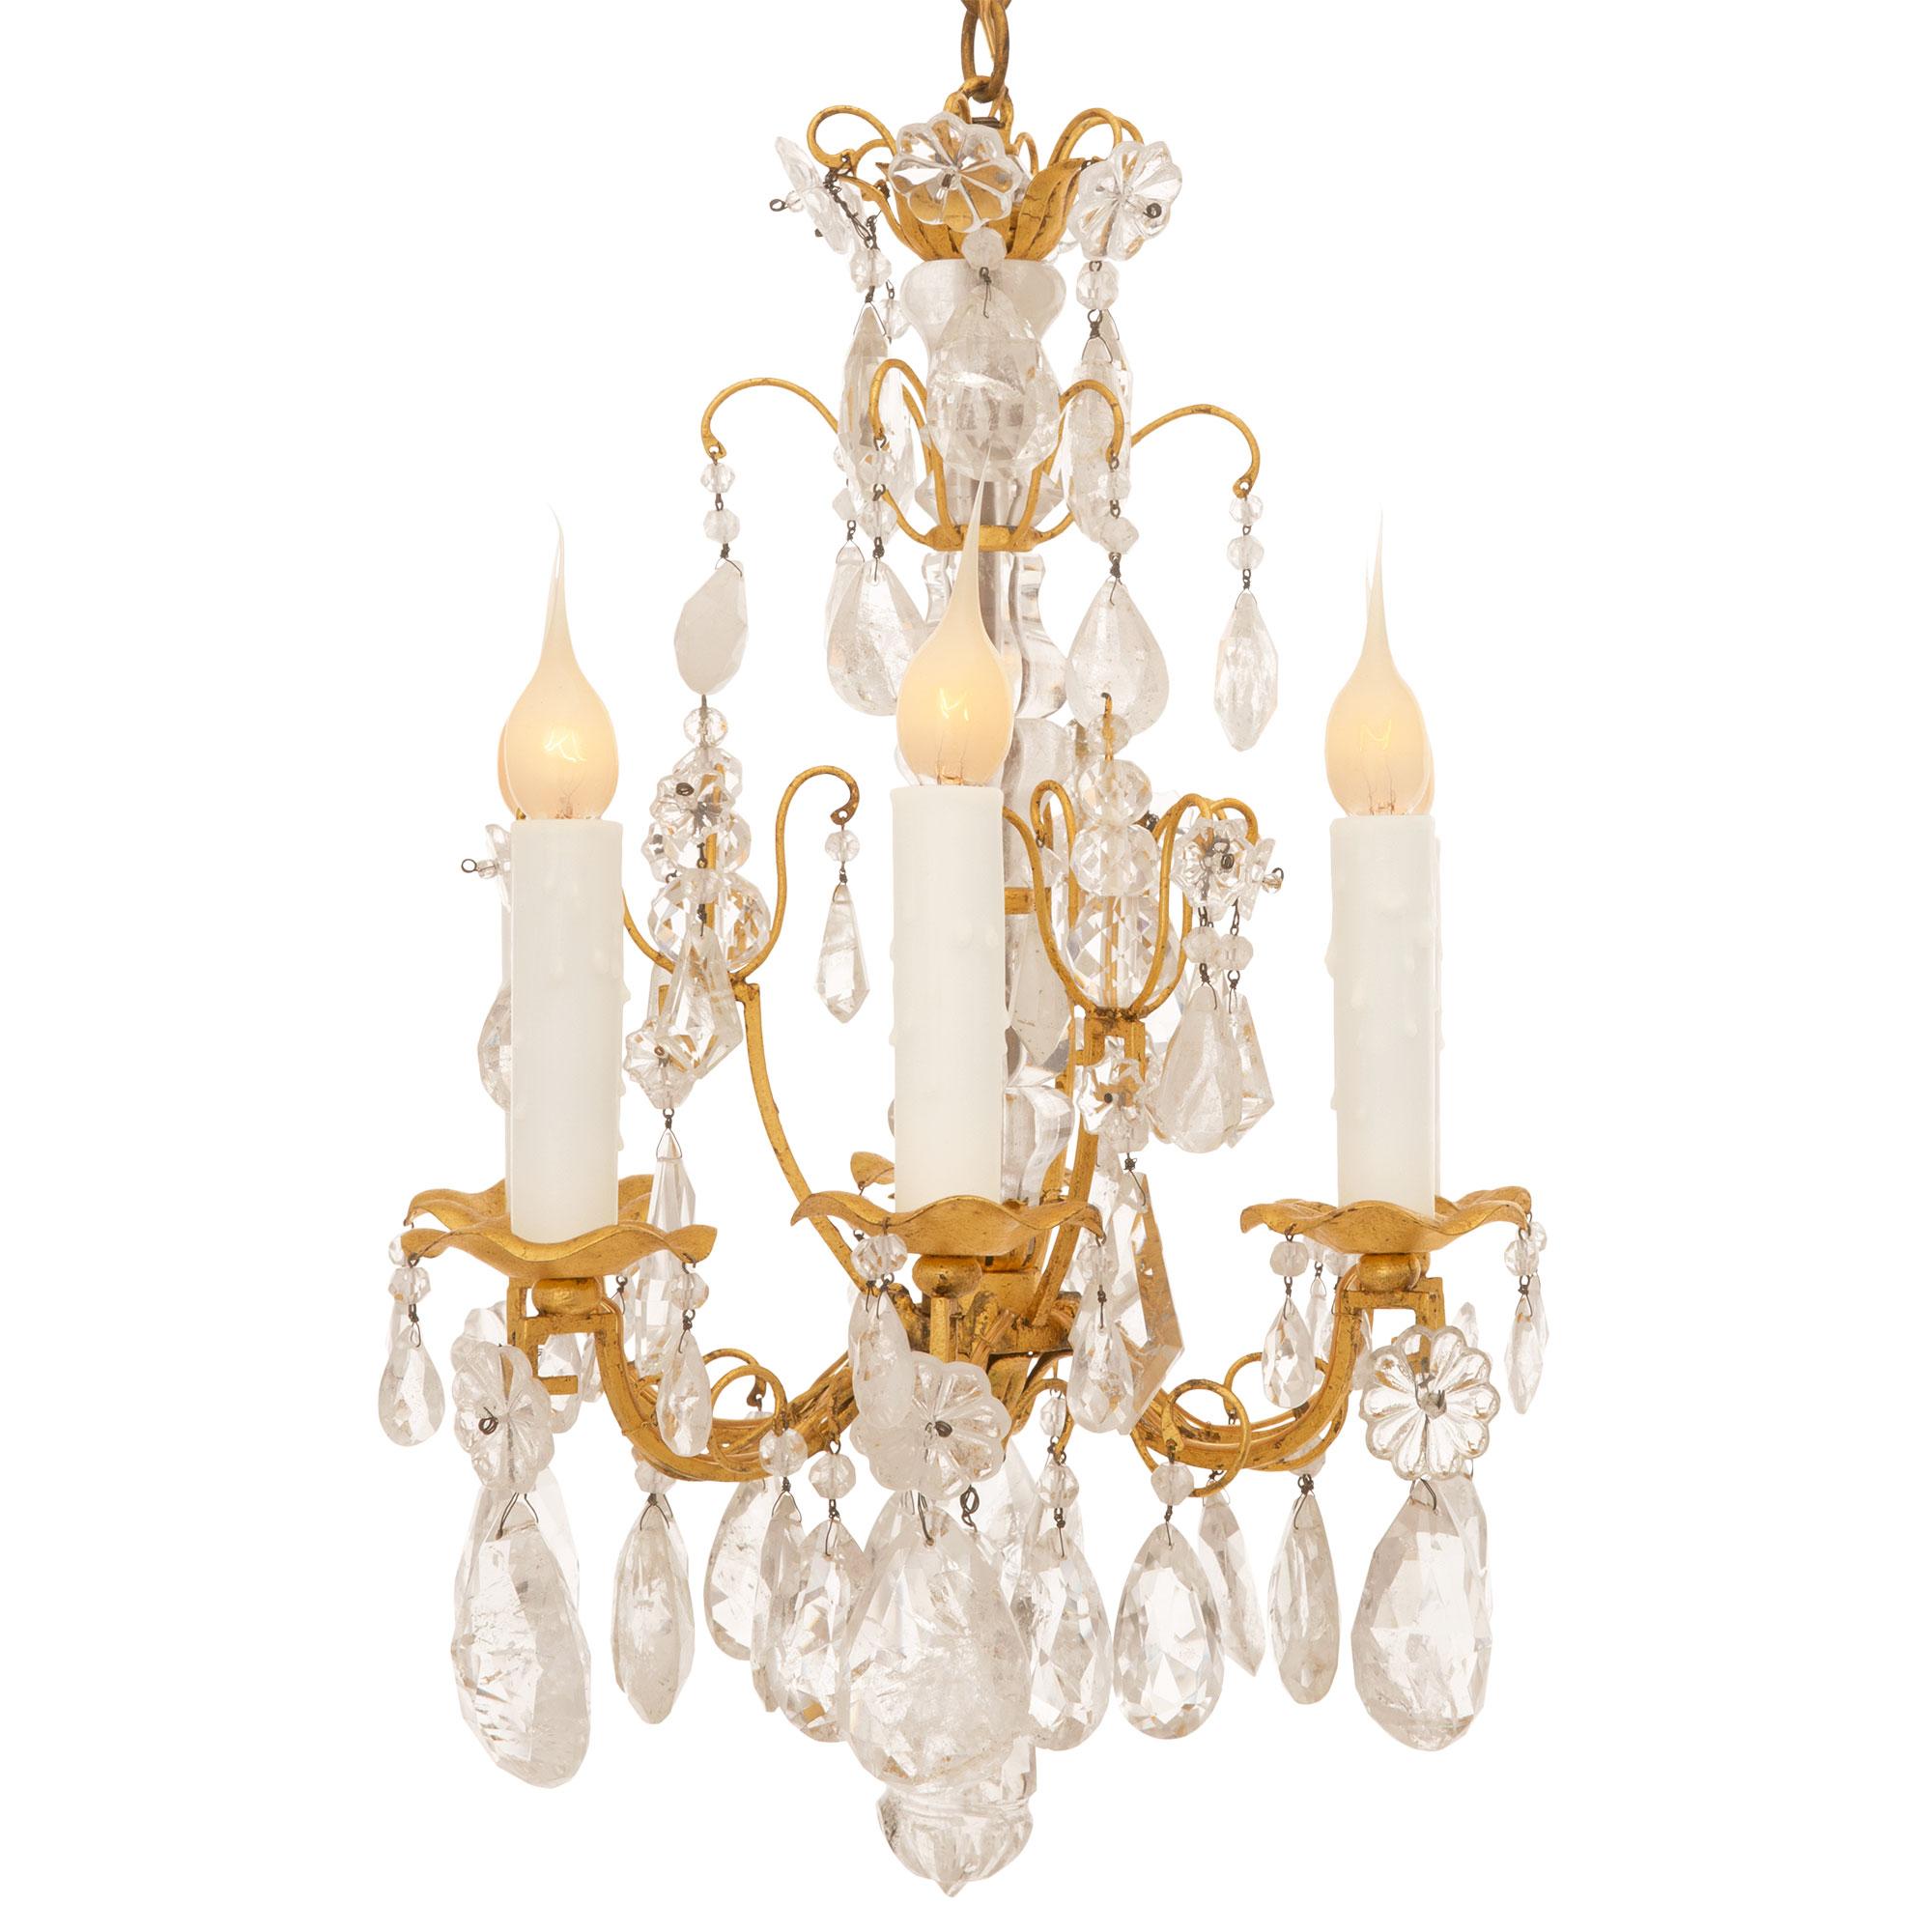 Italian Early 19th Century Louis XVI St. Gilt Metal And Rock Crystal Chandelier In Good Condition For Sale In West Palm Beach, FL